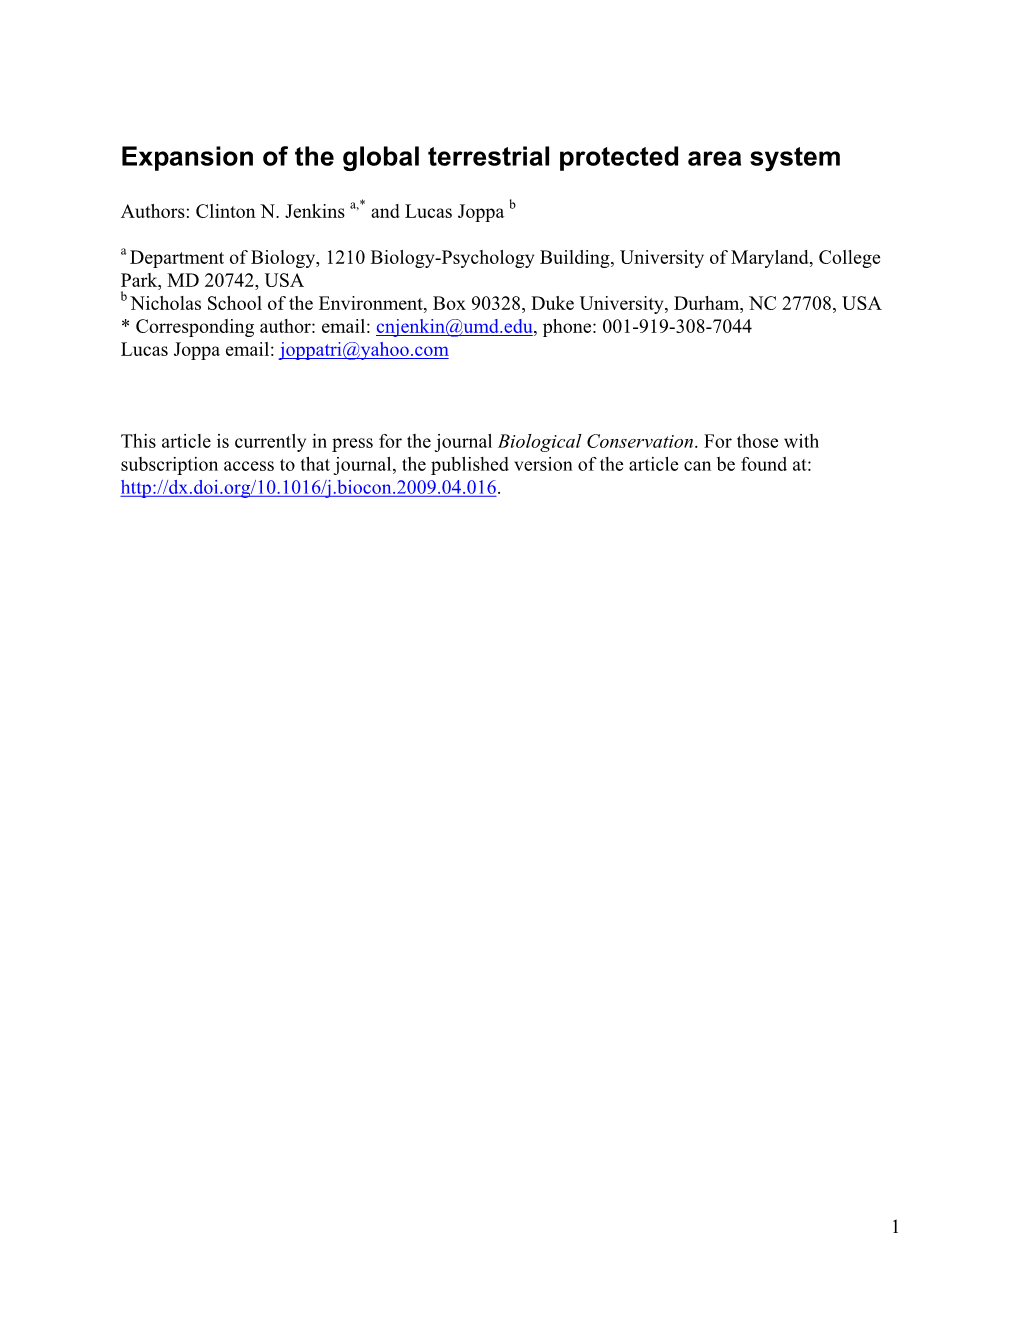 Expansion of the Global Terrestrial Protected Area System